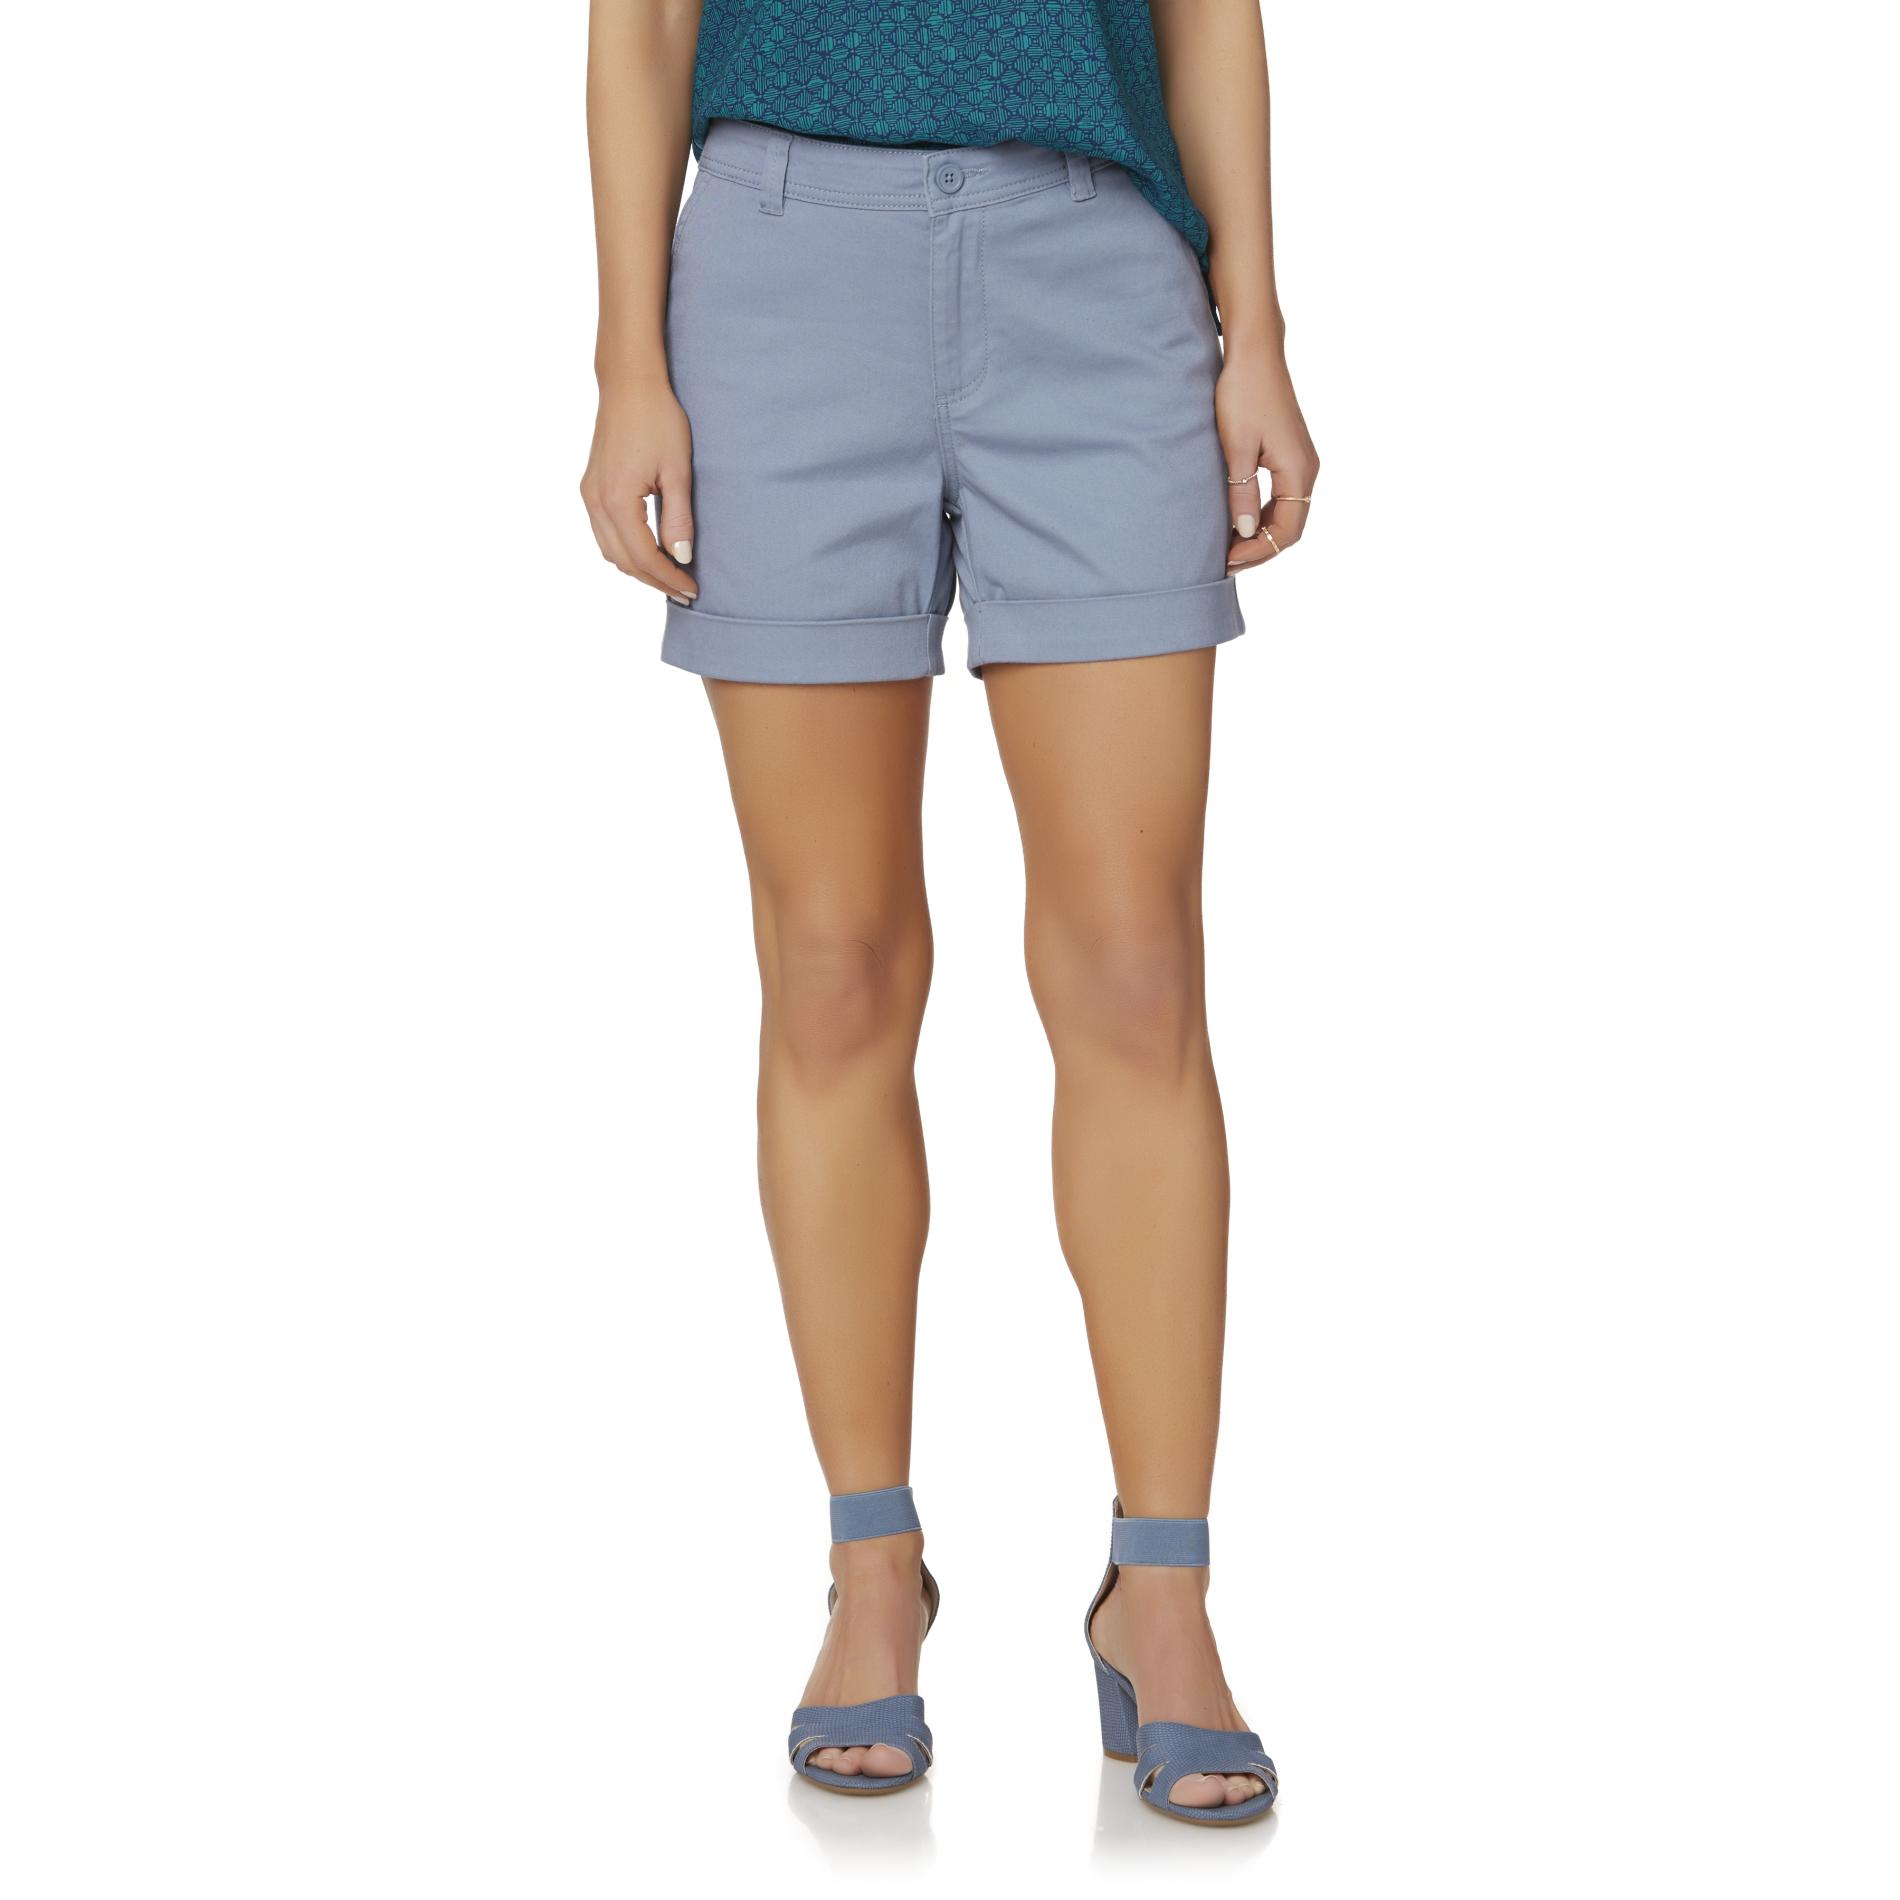 Simply Styled Women's Shorts